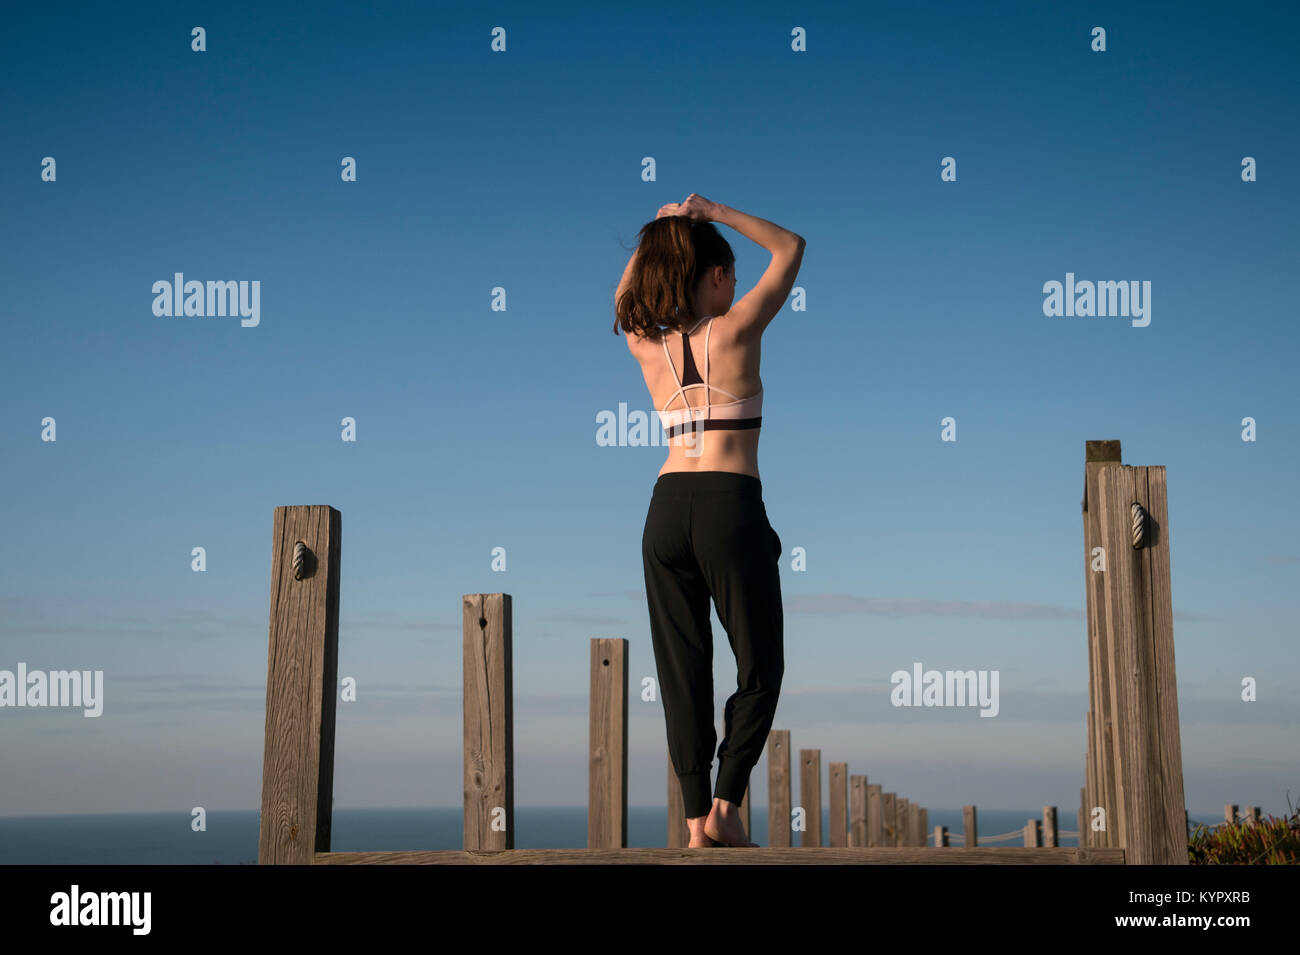 woman tying her hair back into a ponytail before fitness training outside by the sea. Stock Photo